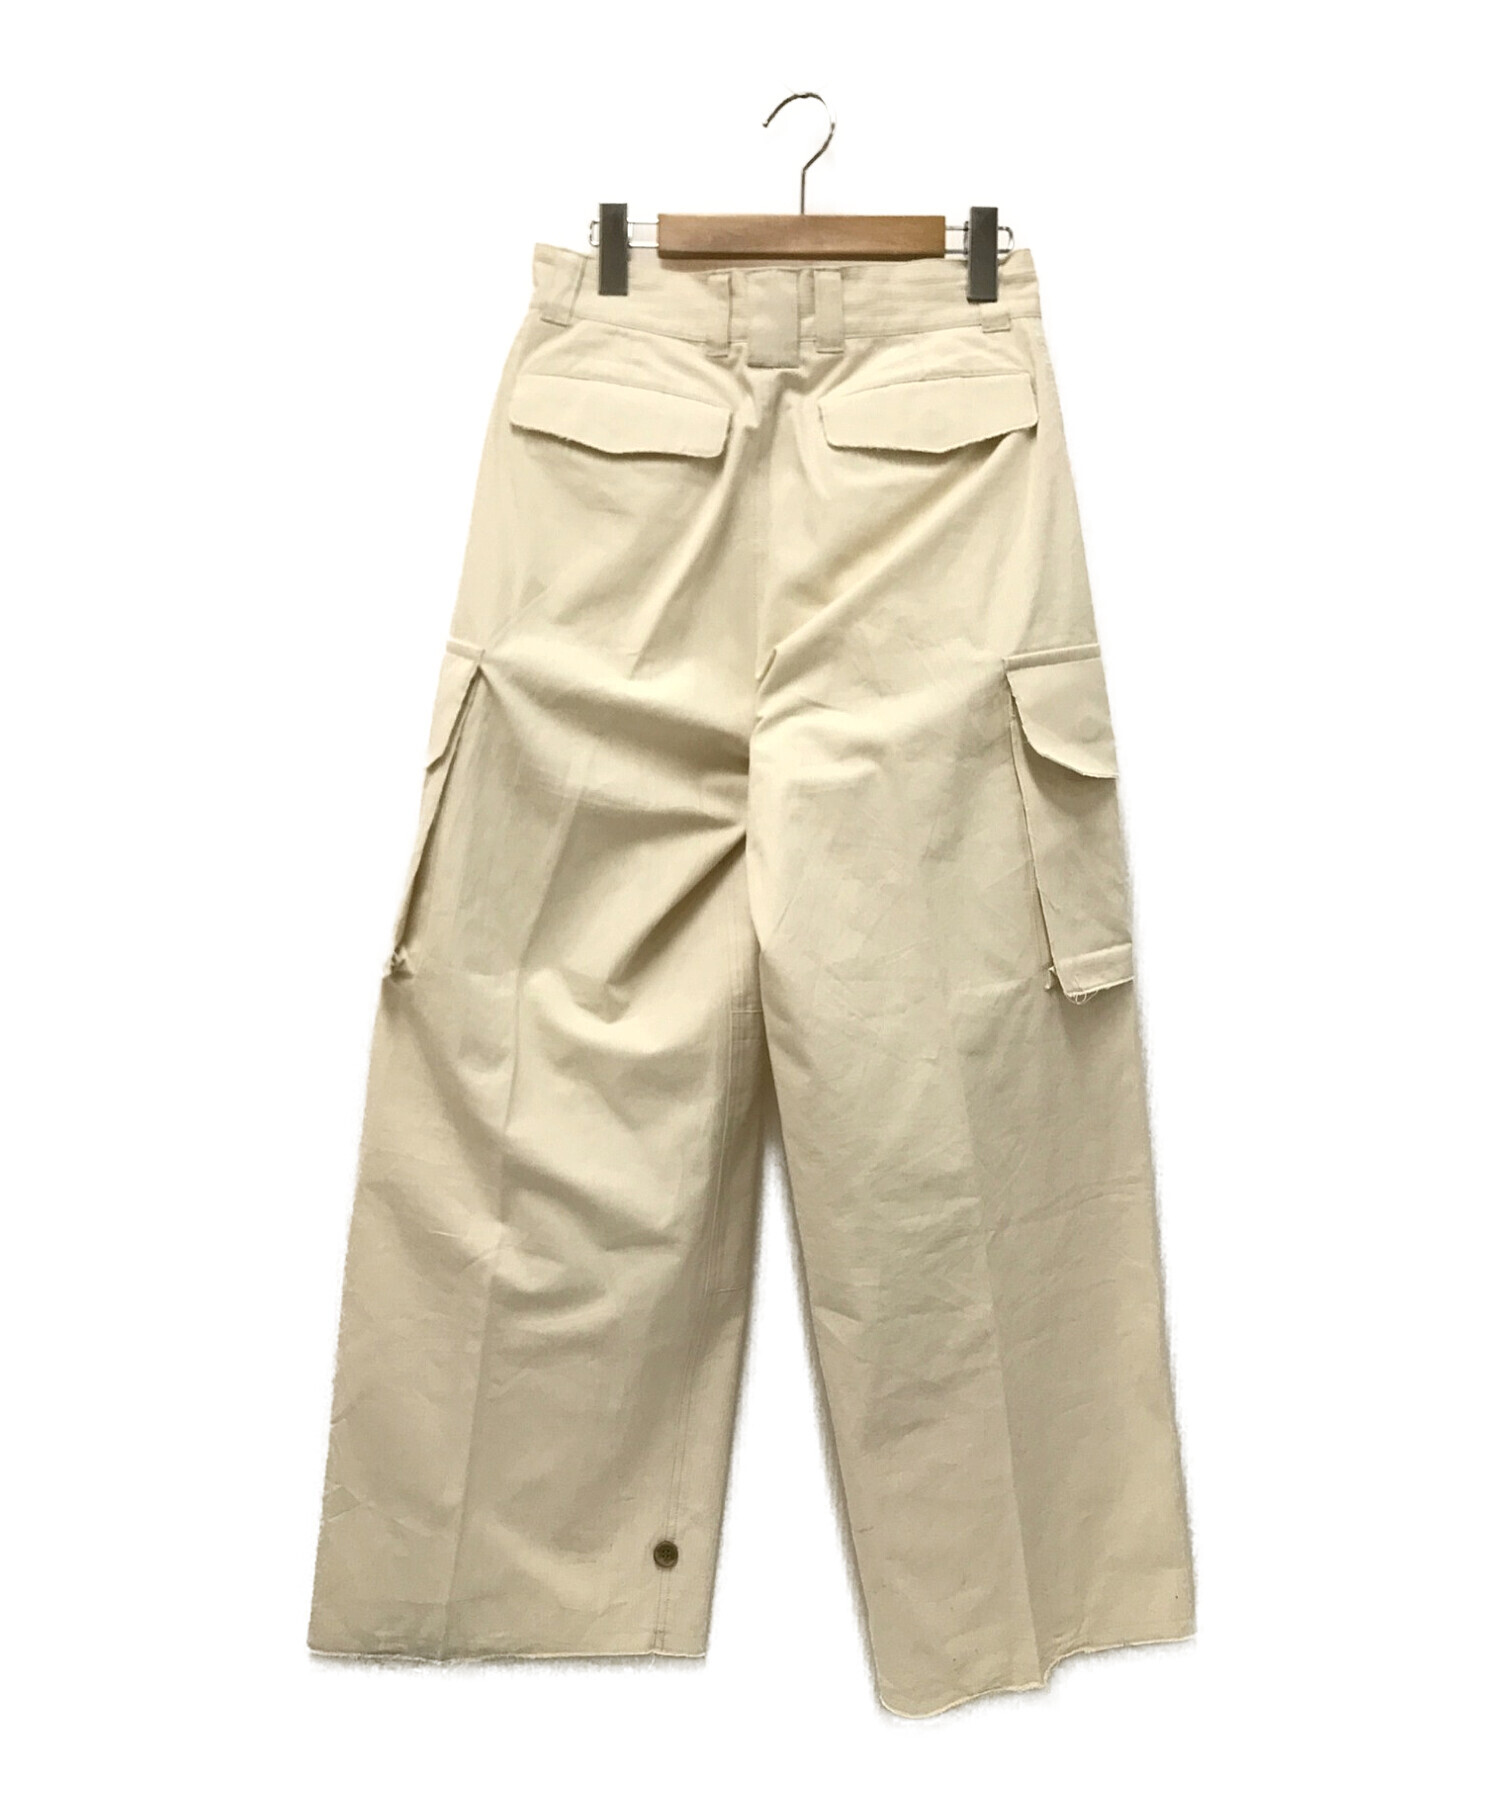 Cotton Ripstop Wideleg Cargo Pant in Camo – REESE COOPER®